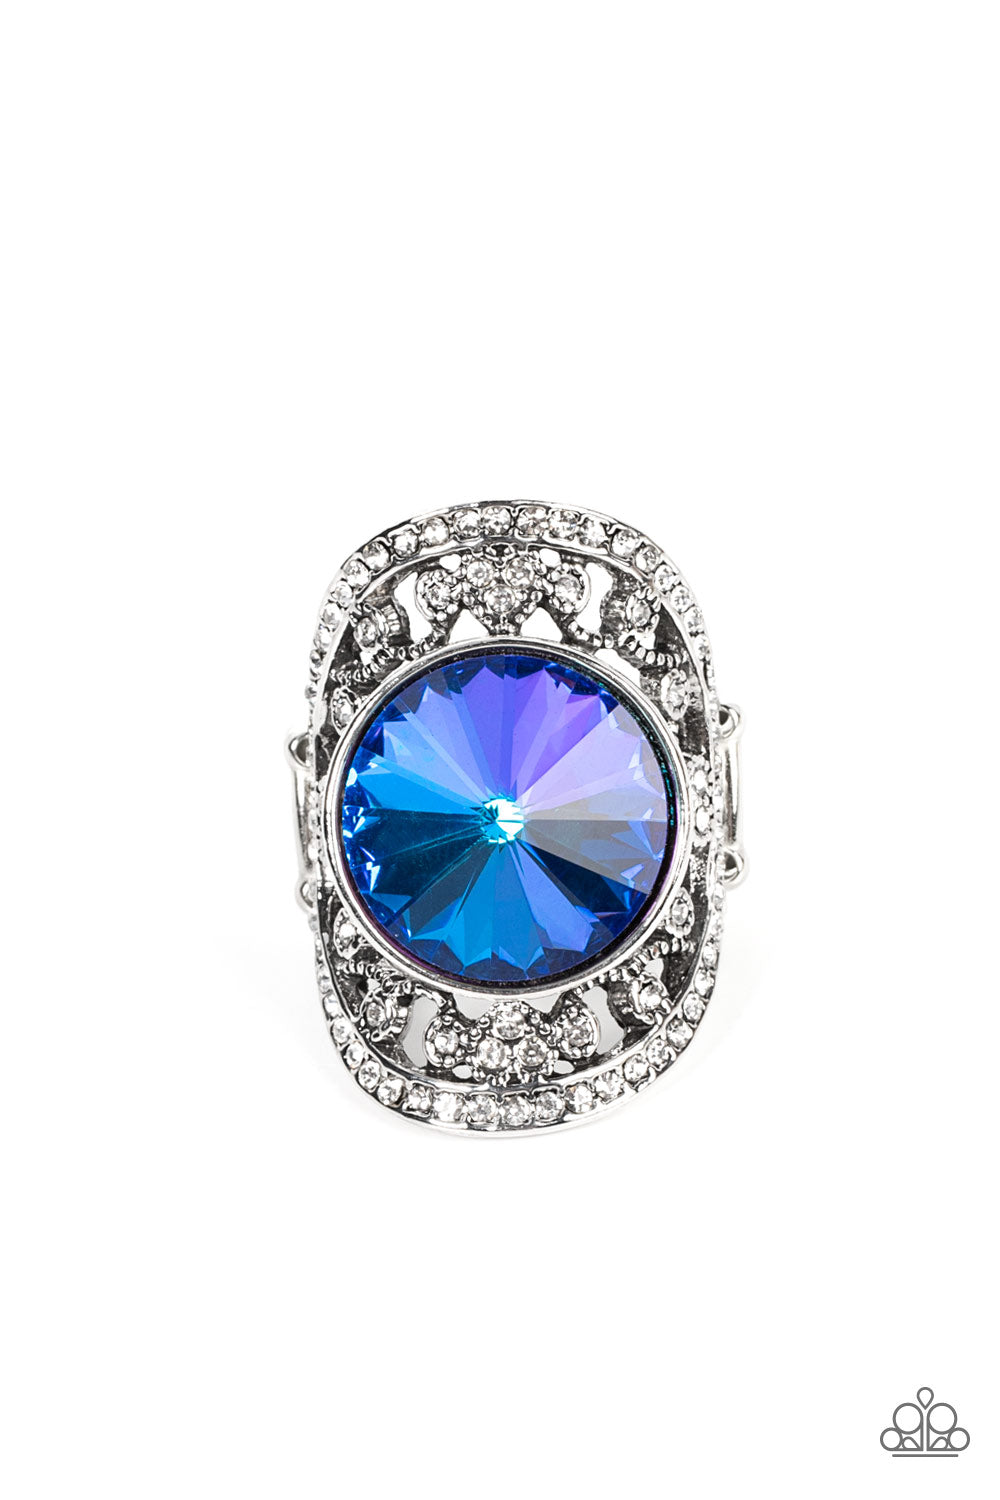 Paparazzi Accessories - Galactic Garden - Blue Gem Ring a dramatically oversized, iridescent blue gem is pressed into the center of an oval silver frame dotted and bordered in glassy white rhinestones, resulting in a sparkly filigree-filled centerpiece atop the finger. Features a stretchy band for a flexible fit. Due to its prismatic palette, color may vary.  Sold as one individual ring.